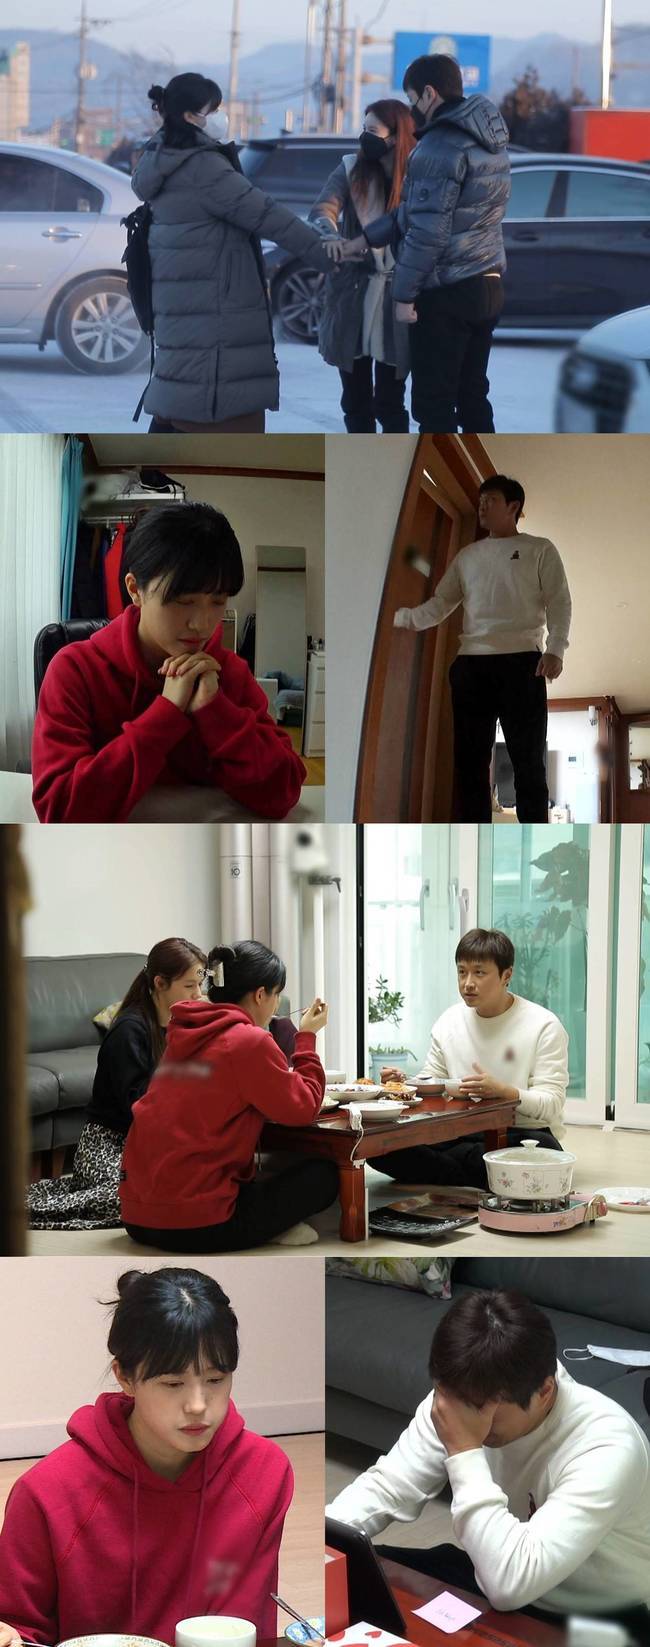 Actor Jin Tae-hyeun, Park Si-euns Storm miso-heated story is revealedOn March 8, SBS Same Bed, Different Dreams 2 Season 2 - You Are My Destiny, the appearance of Jin Tae-hyeun and Park Si-eun, who are anxiously waiting for Daughter Davida to announce his acceptance of college transfer, is revealed.Tensions have been around since the early hours at the house of the Jin Tae-hyeun Park Si-eun couple.This was because Daughter Davida, who prepared for one year, was announced to pass the transfer test.As the competition rate is high, the Jin Tae-hyeunPark Si-eun couple waited nervously to announce the results, worrying that we really do not want to cry Daughter.Davida is the back door that made the Jin Tae-hyeun Park Si-eun more nervous because she did not walk to the door and lock up waiting for the announcement.Meanwhile, Jin Tae-hyeun surprised everyone by showing Daughter Davida the sadness she has endured for the past year.Jin Tae-hyeun began to pour out words that he had not done to Davida, who was sensitive to preparations for the transfer test.Jin Tae-hyeun is said to have told Daughter Davida firmly, This is never enough! And that he poured Storm nagging into the dissuade of Park Si-eun.I wonder what happened between Jin Tae-hyeun and Daughter Davida over the past year.Eventually, Jin Tae-hun broke out in tears at the sudden action of Park Si-eun and Daughter Davida.Park Si-eun and Davida showed suspicious behavior behind Jin Tae-hyeuns back, leaving everyone wondering.Since then, Jin Tae-hyeun has said that he eventually worked on Storm miso-heat in a word from Park Si-eun and Daughter Davida.